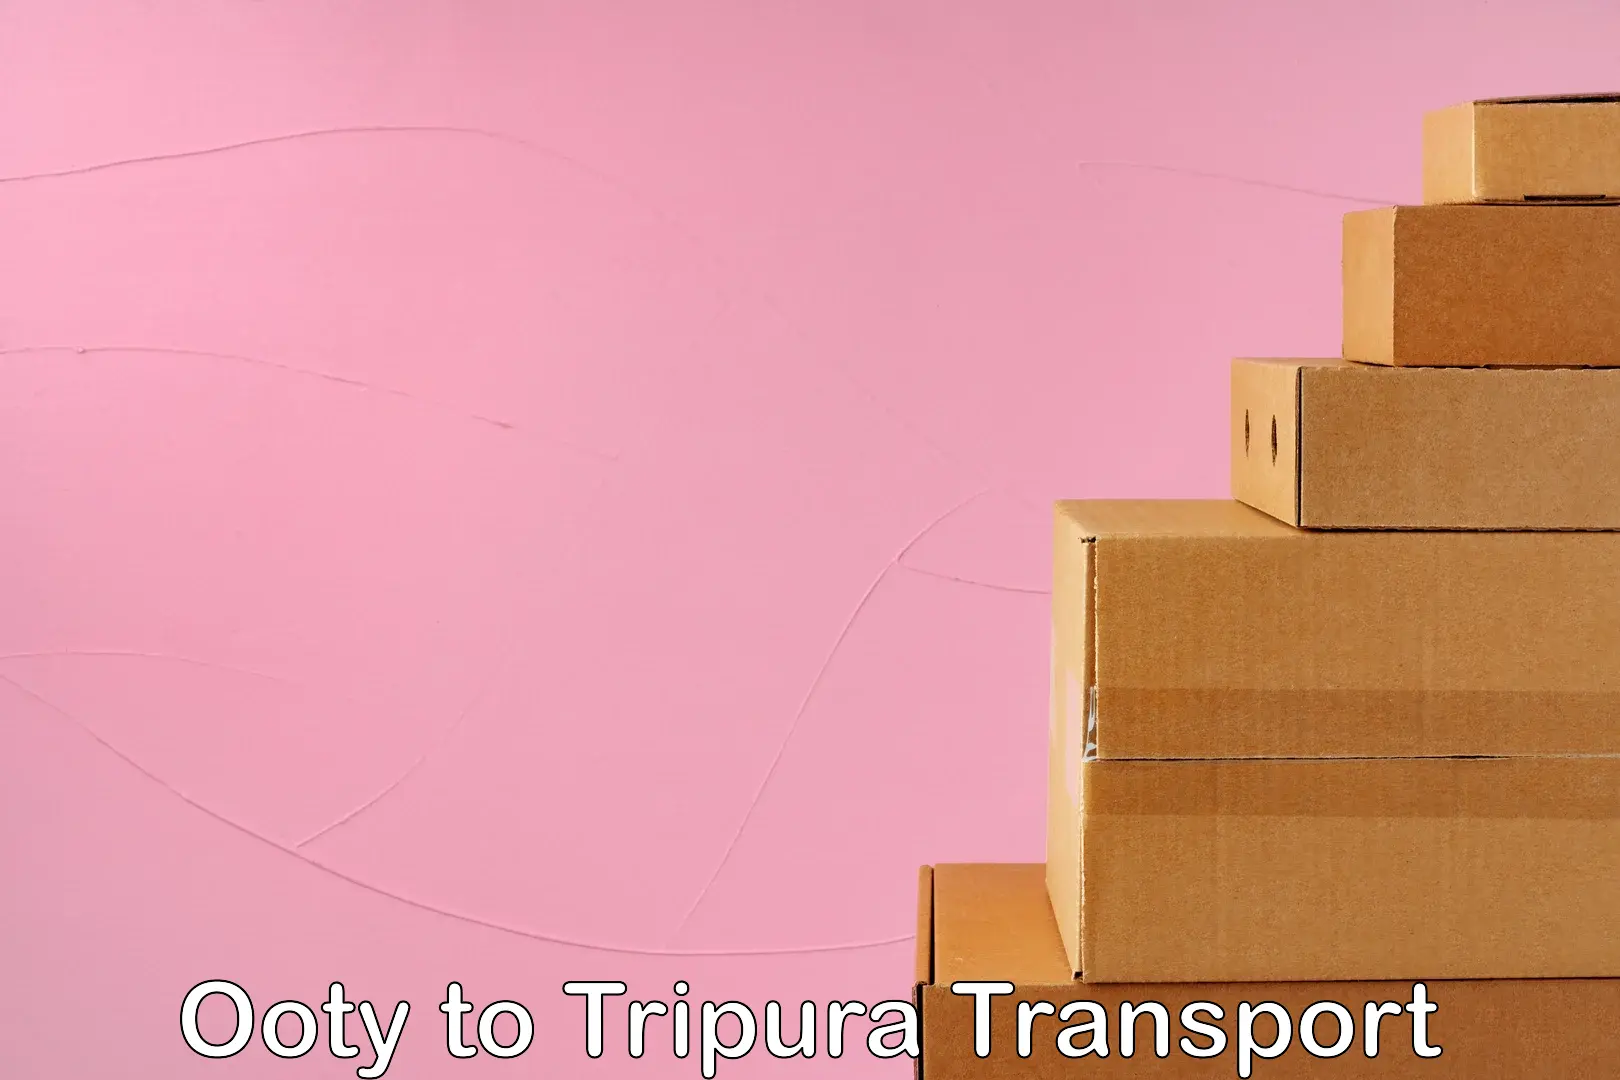 Road transport services Ooty to Udaipur Tripura